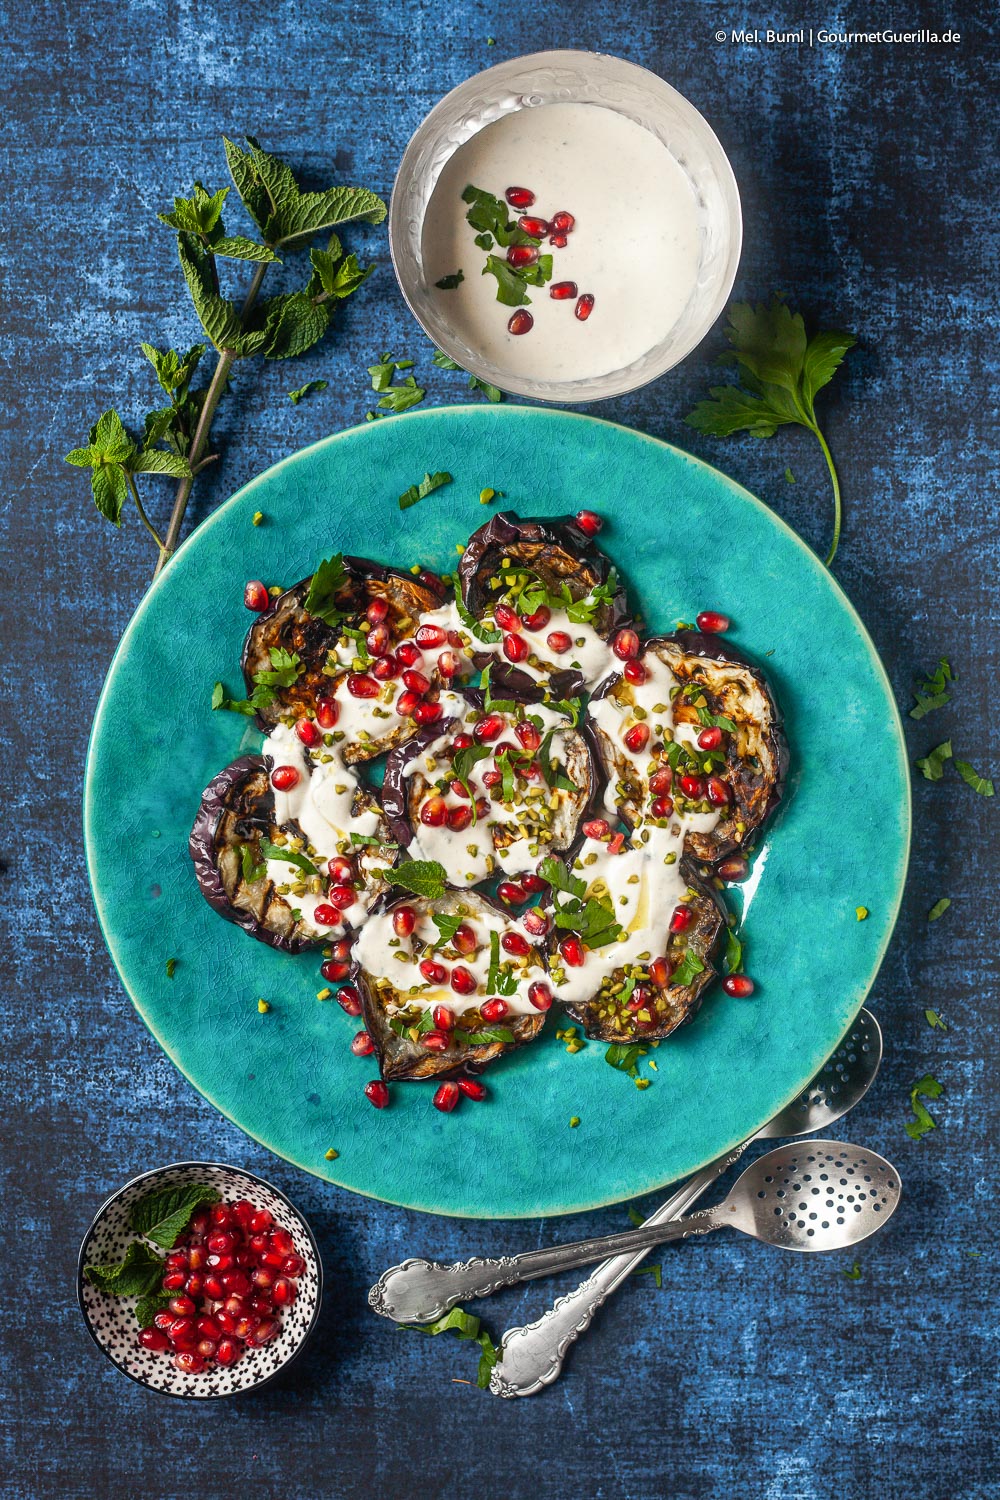 Grilled aubergines 1001 nights with sesame sauce, pomegranate and pistachio nuts | GourmetGuerilla .de 